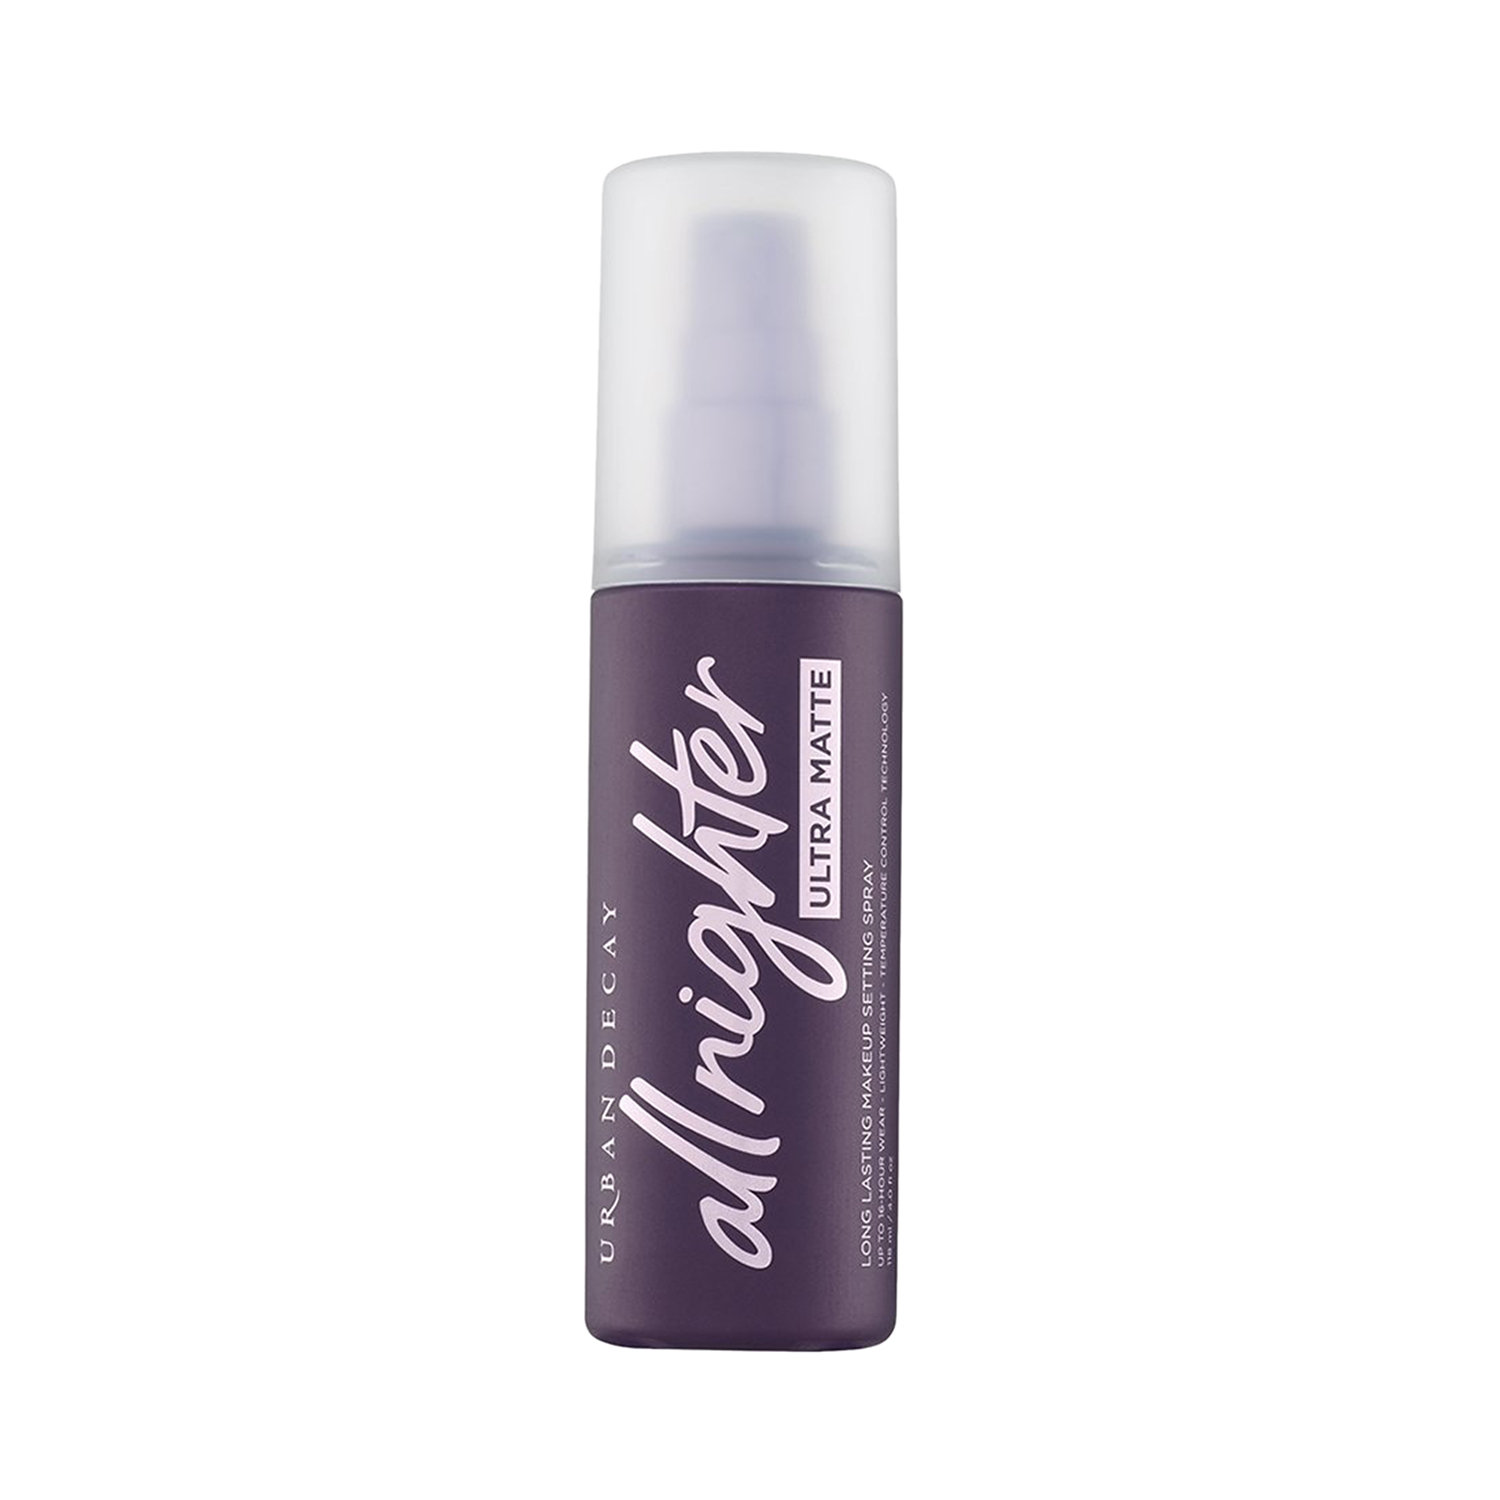 UD ULTRA MATTE ALL NIGHTER MAKEUP SETTING SPRAY 118 ml